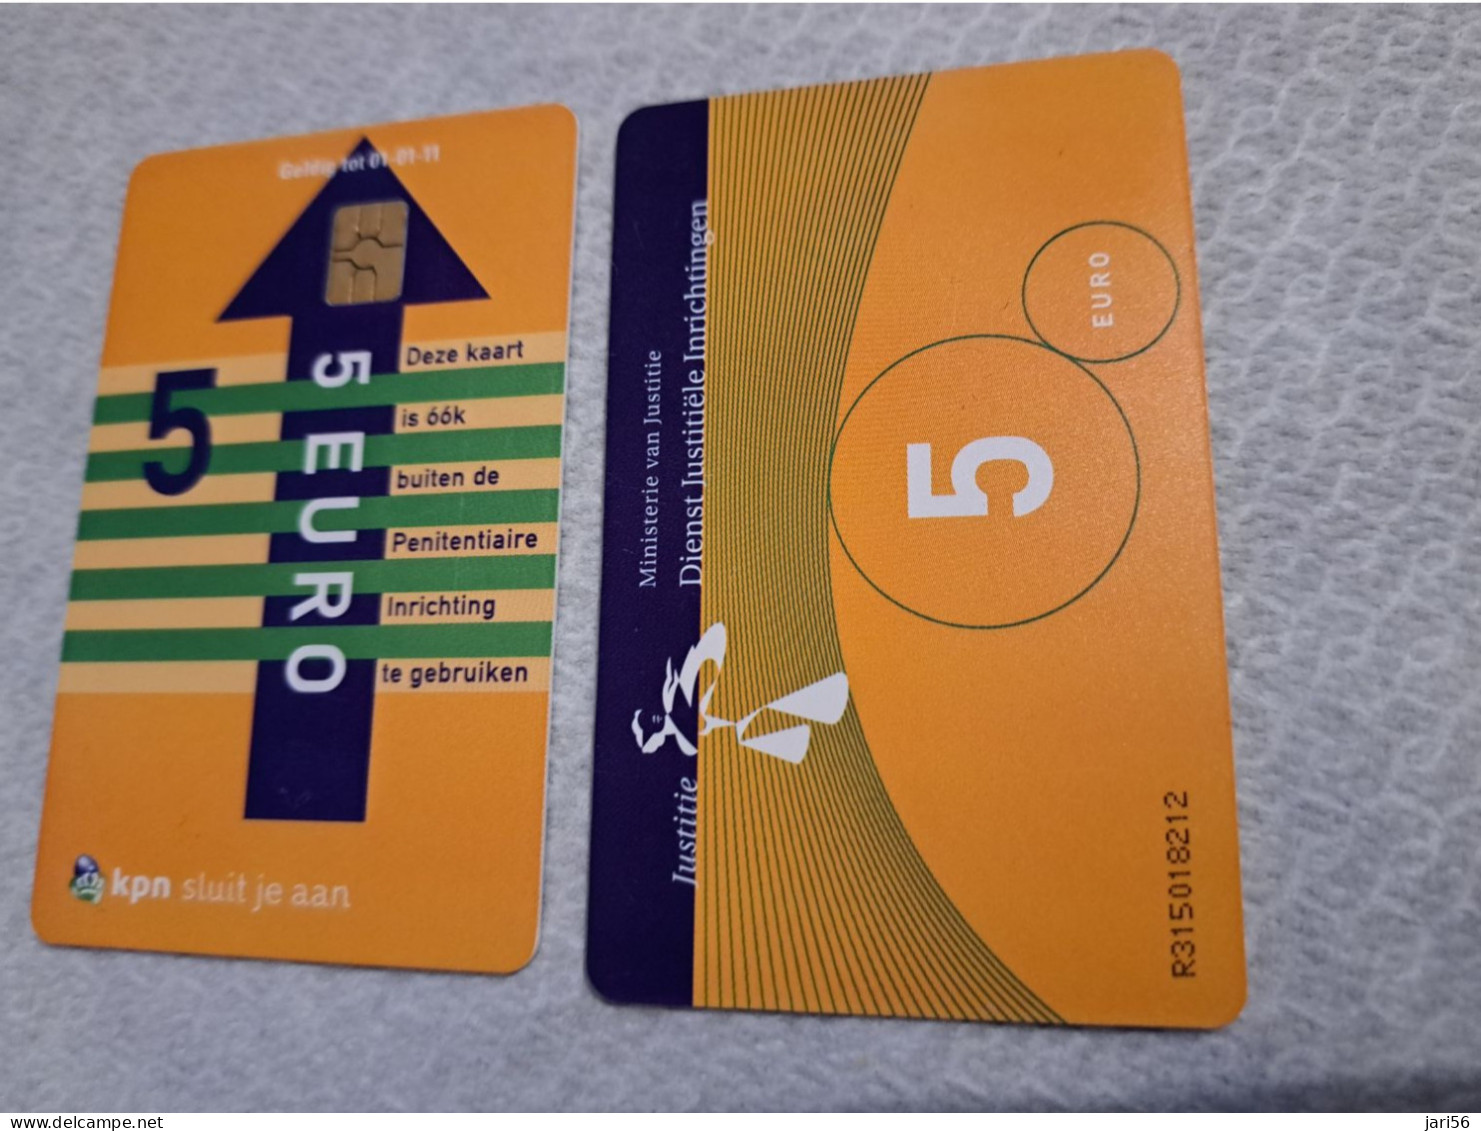 NETHERLANDS   € 5,-  ,-  / USED  / DATE  01-01-11  JUSTITIE/PRISON CARD  CHIP CARD/ USED   ** 16146** - [3] Sim Cards, Prepaid & Refills